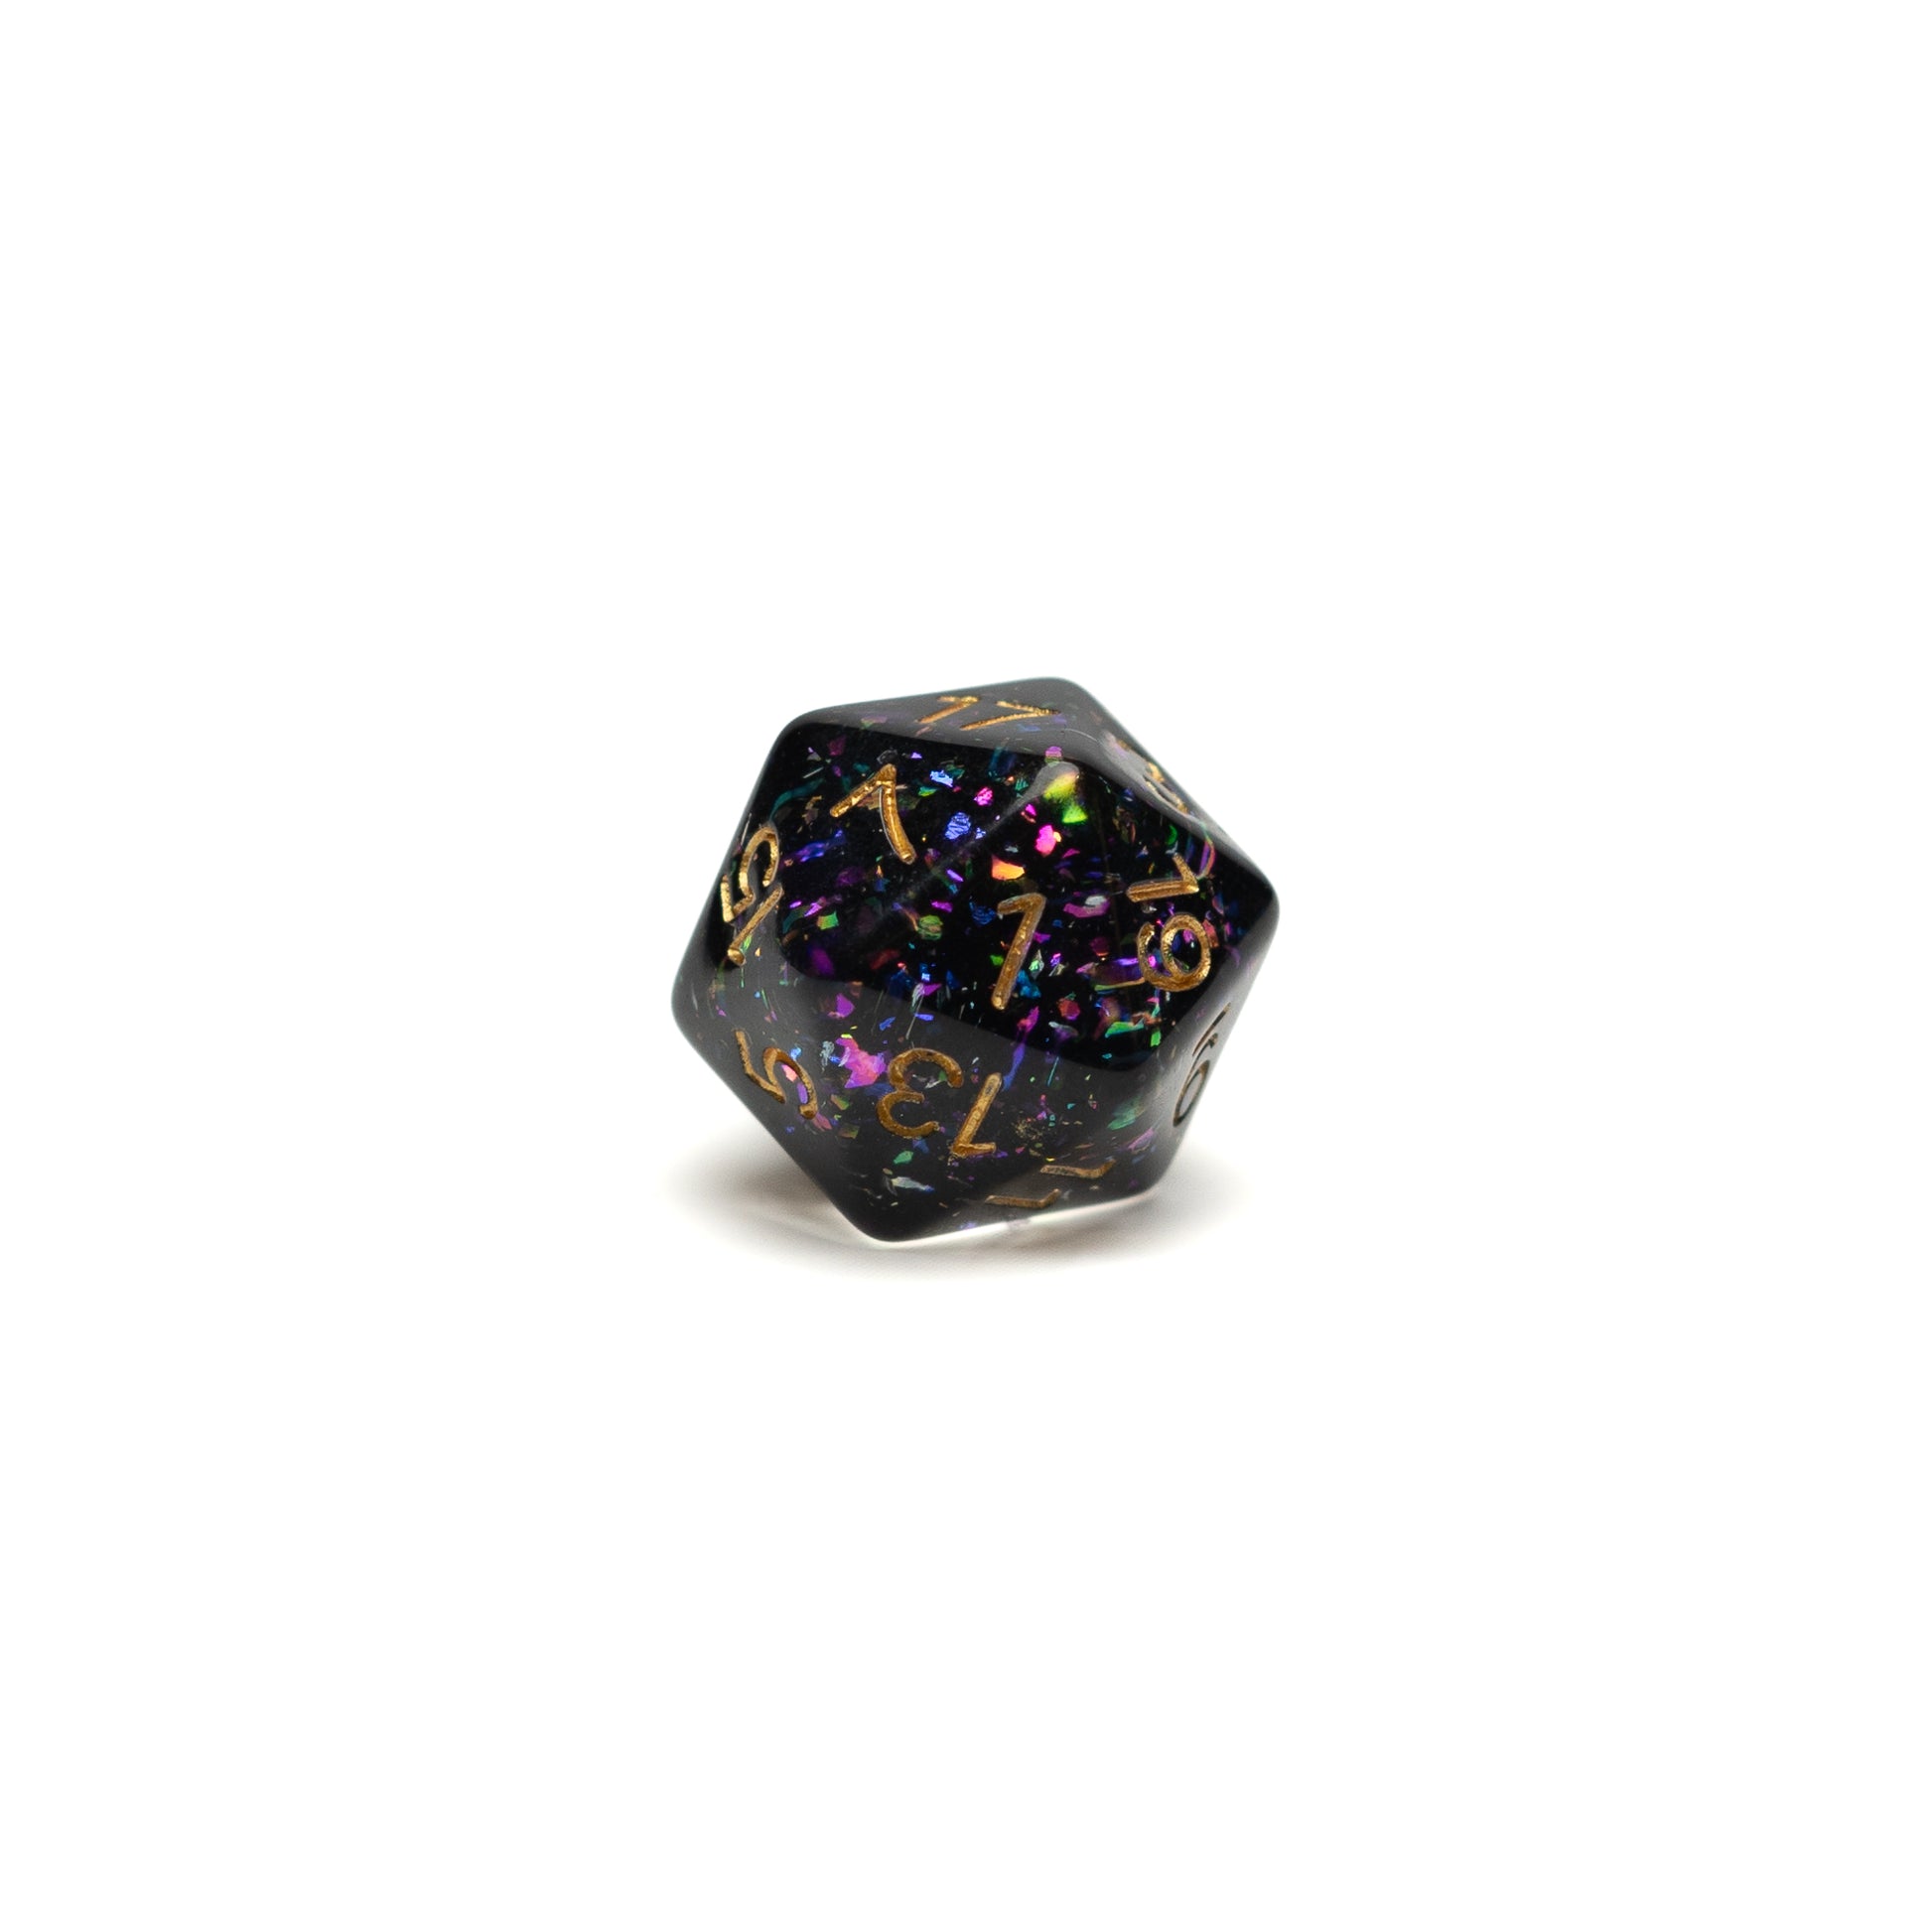 Roll Britannia Derek Normalbeard Dungeons and Dragons D20 Dice with Rainbow Glitter Confetti Aesthetic